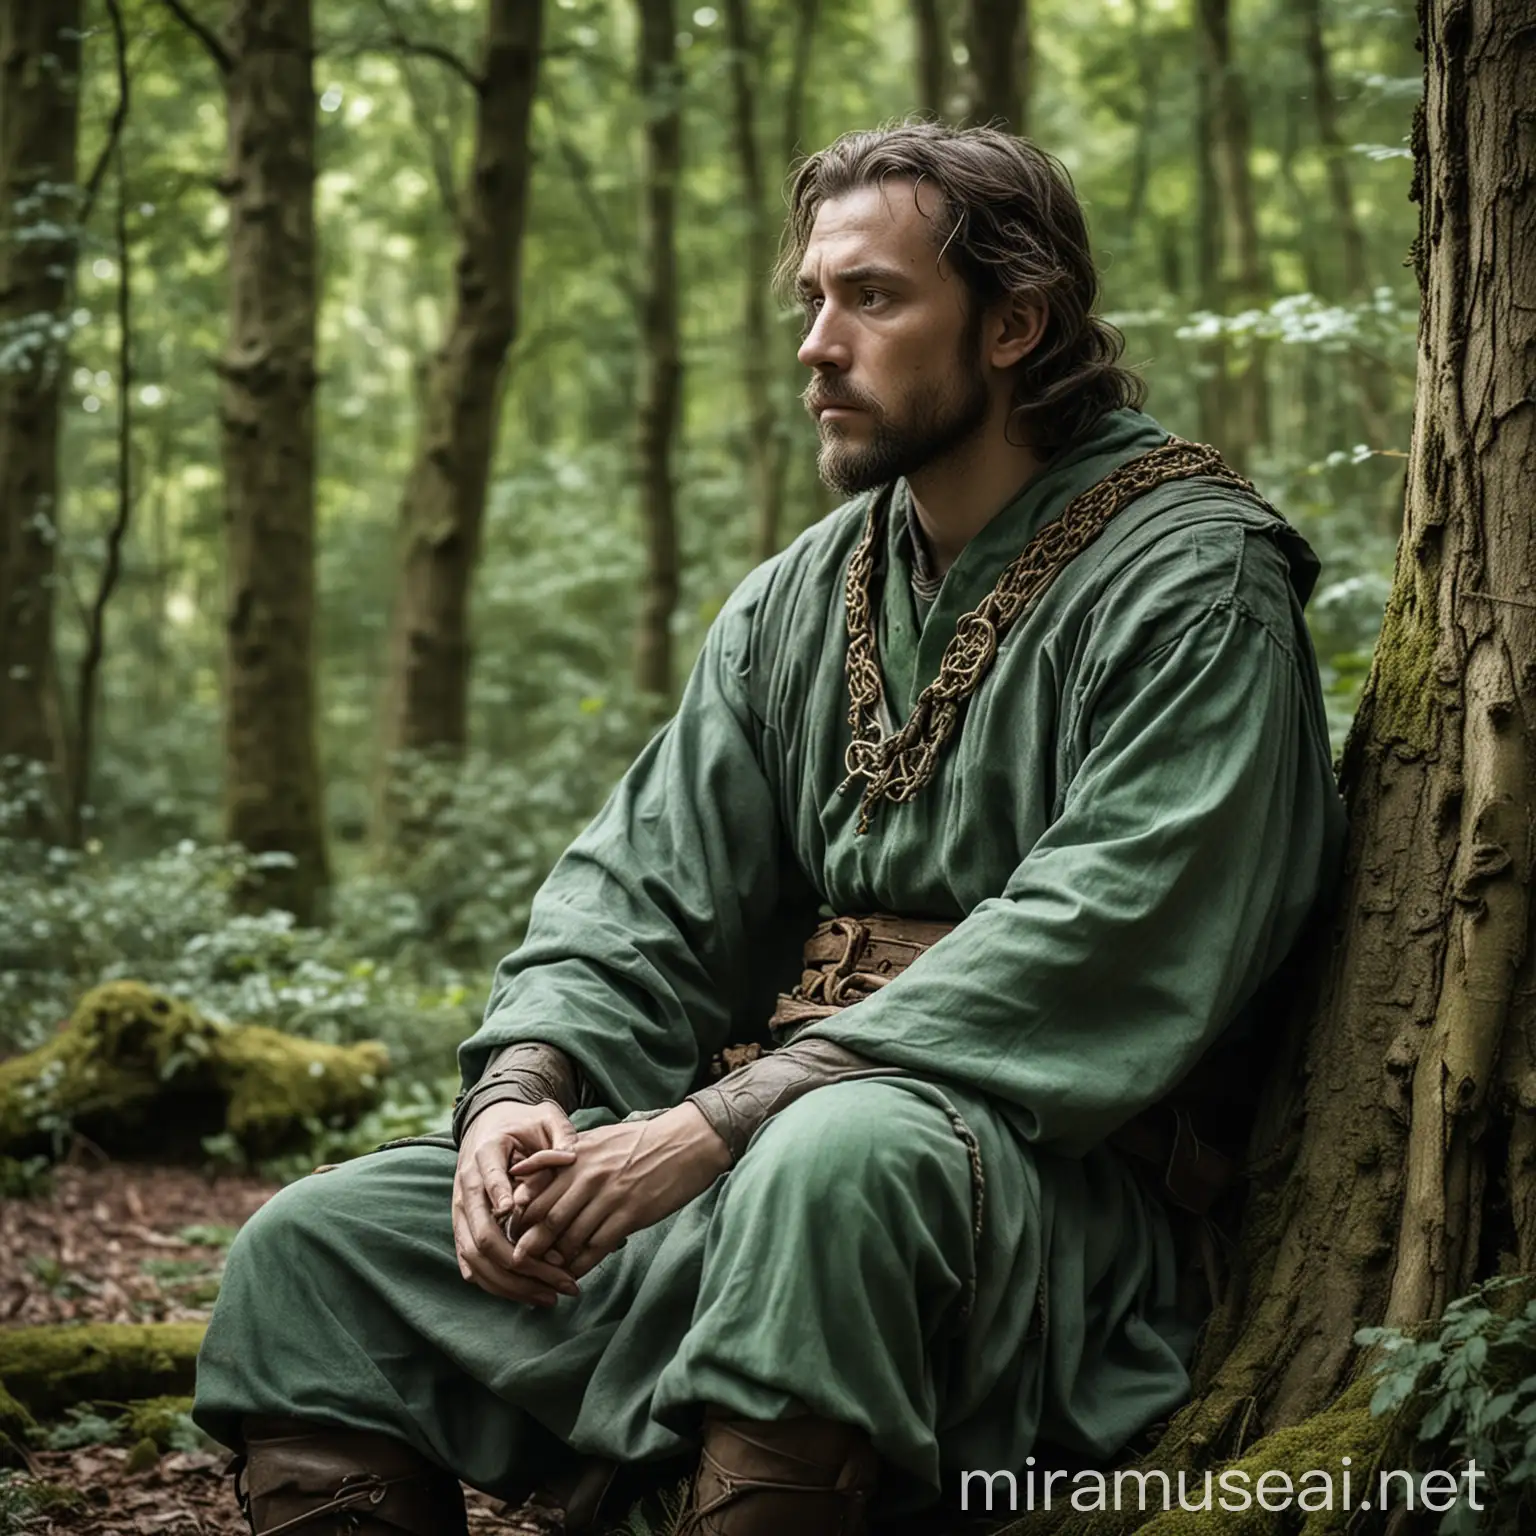 A medieval man sat in the woods looking contemplative but he's made of jade